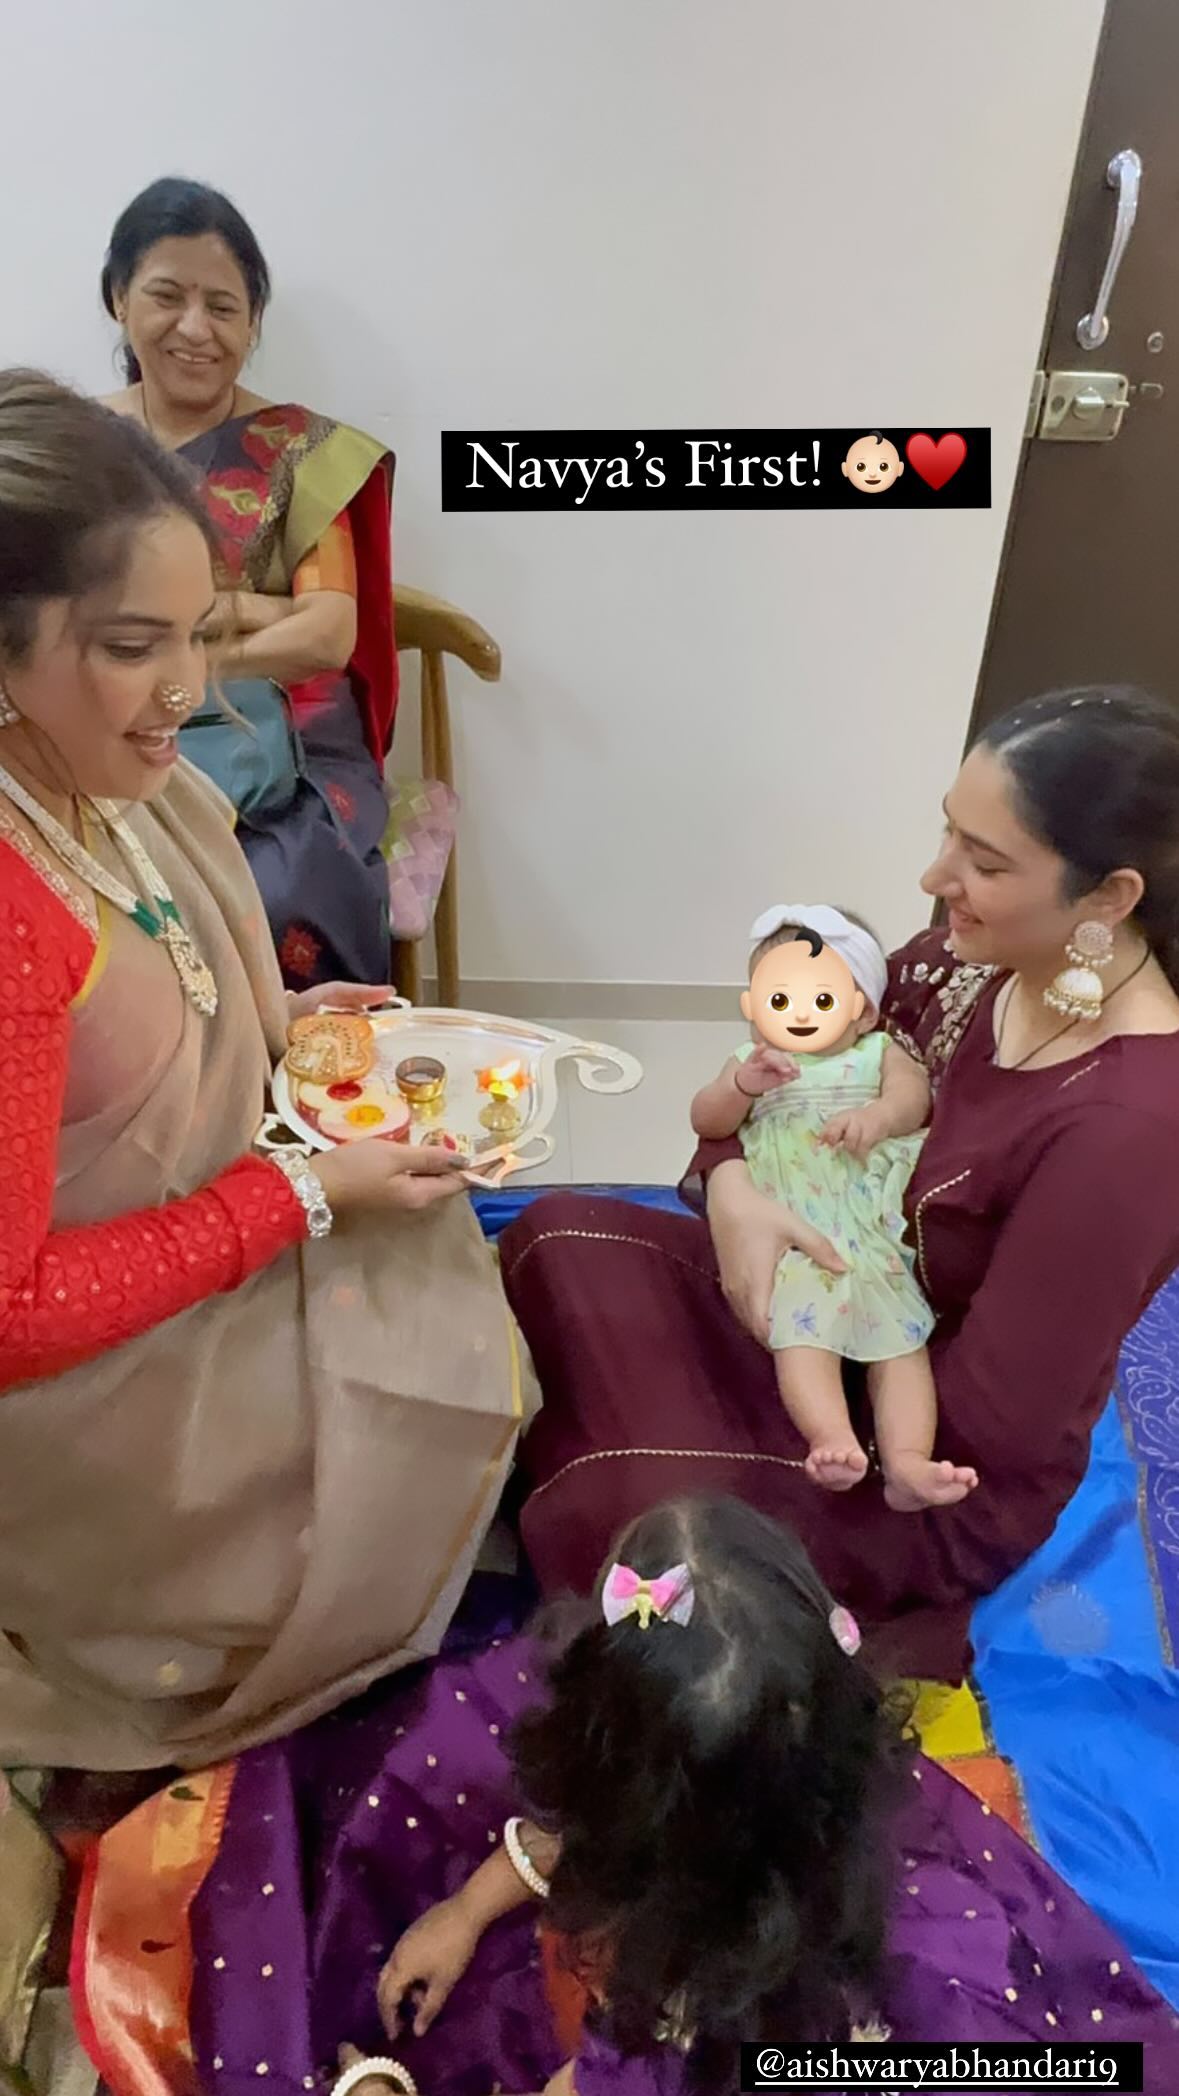 Disha Parmar's first traditional look with her daughter, wearing haldi kumkum, wine suit and earrings.